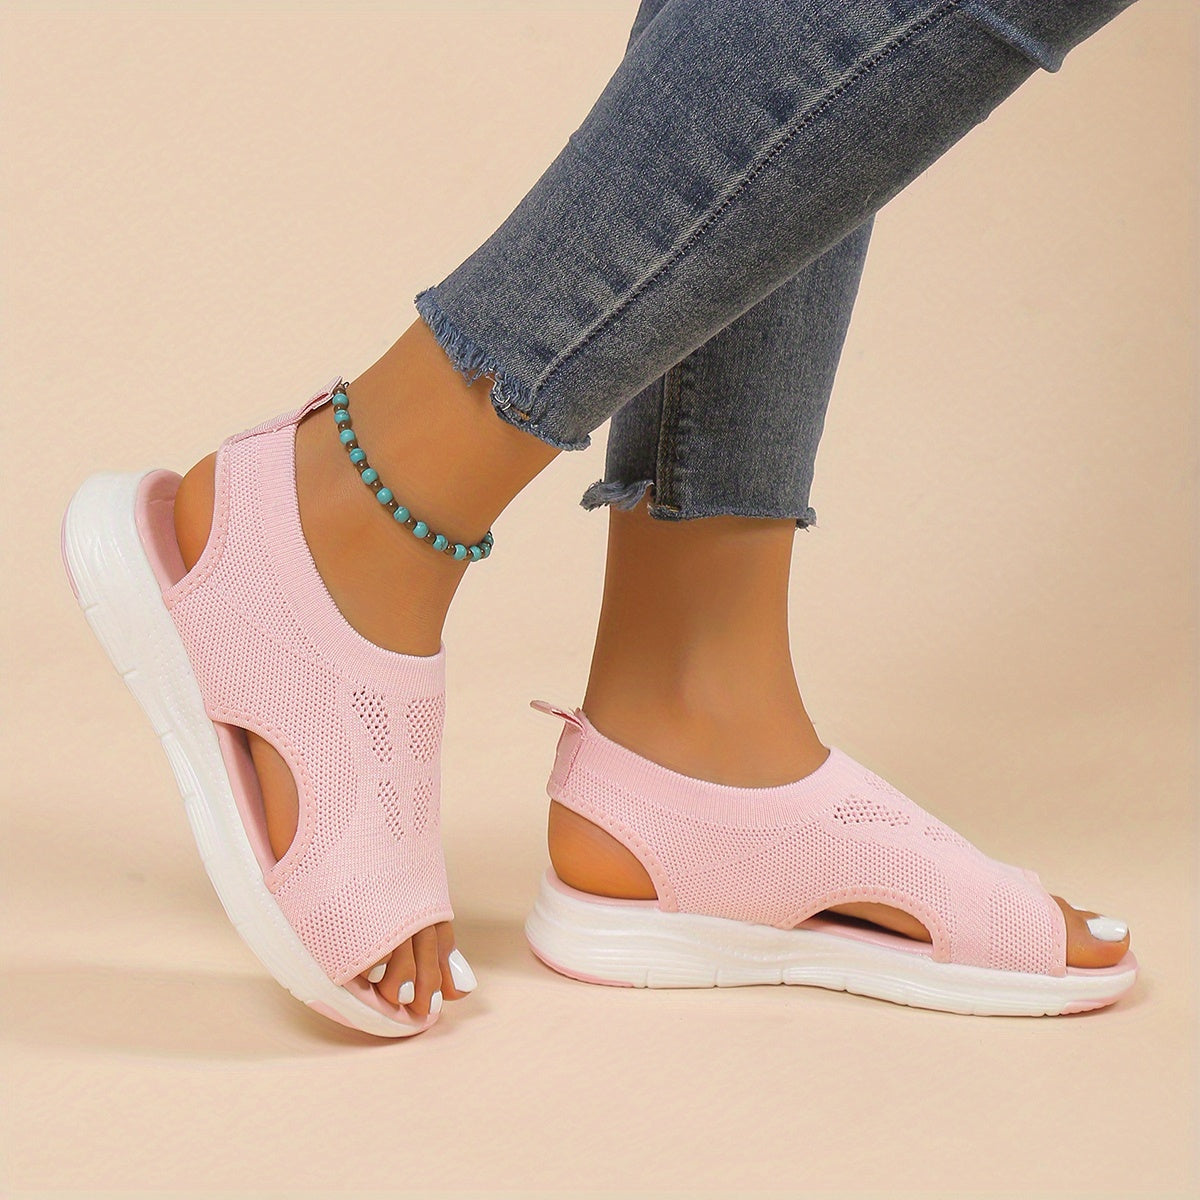 Women's Knitted Cut-out Sandals, Solid Color Open Toe Slip On Shoes, Lightweight Wedge Shoes